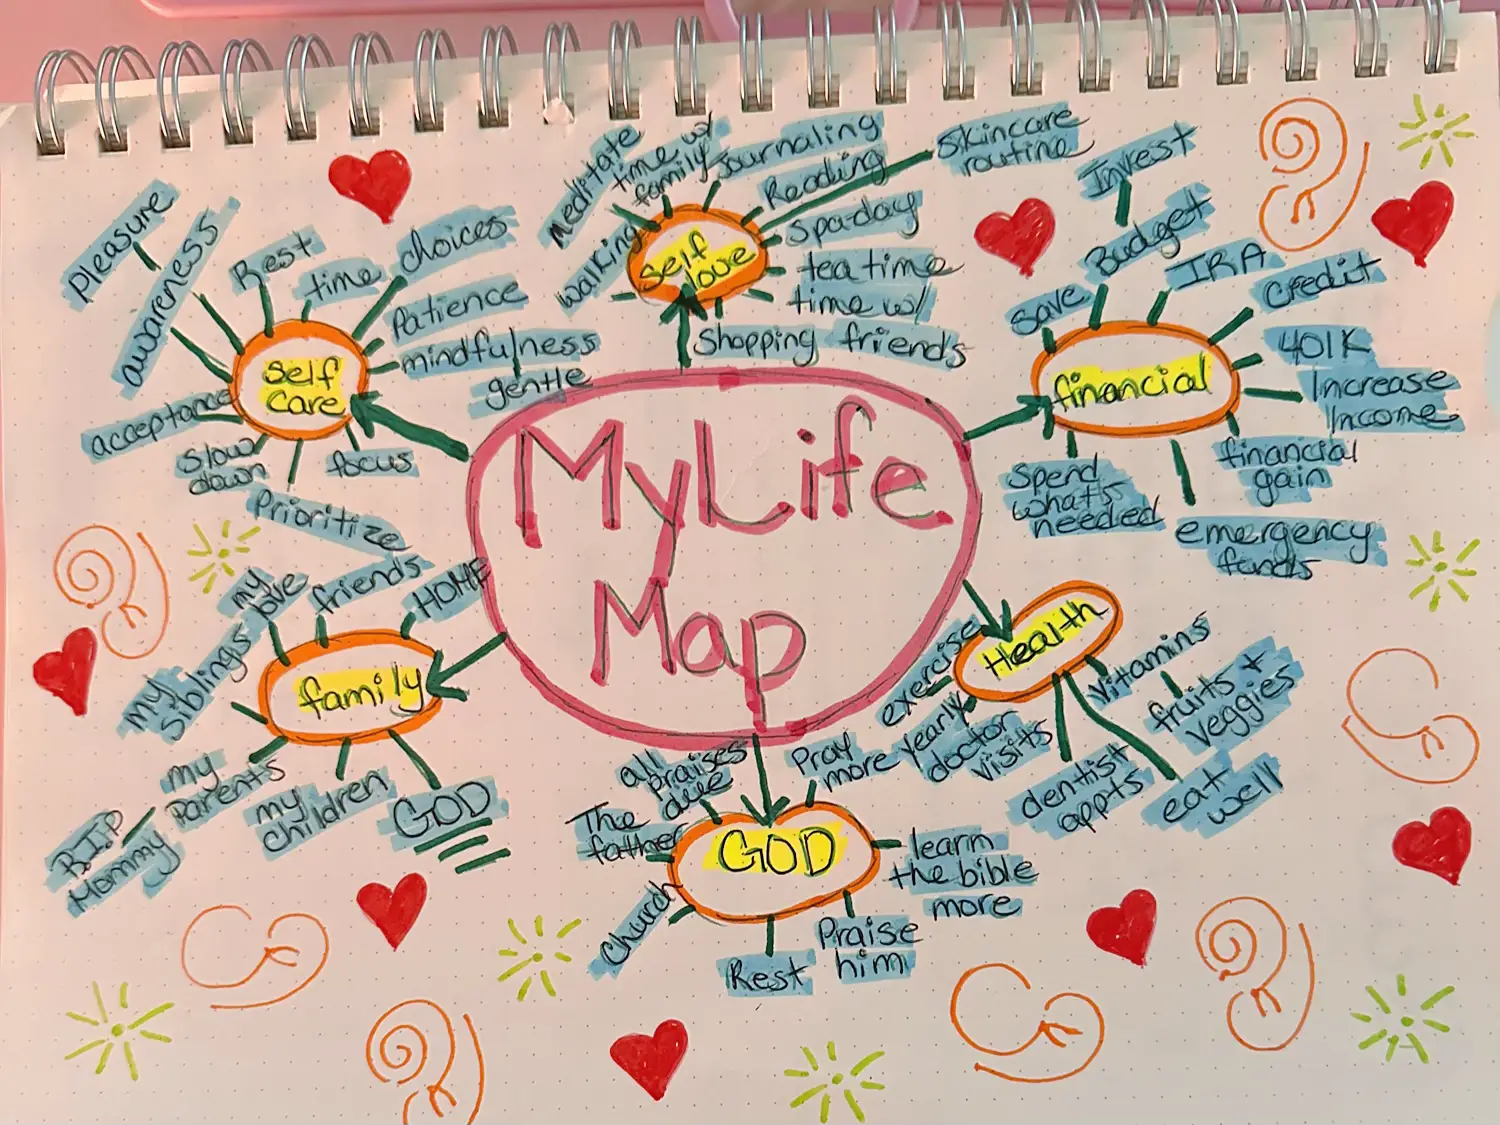 Life Maps and Growth Exercises's images